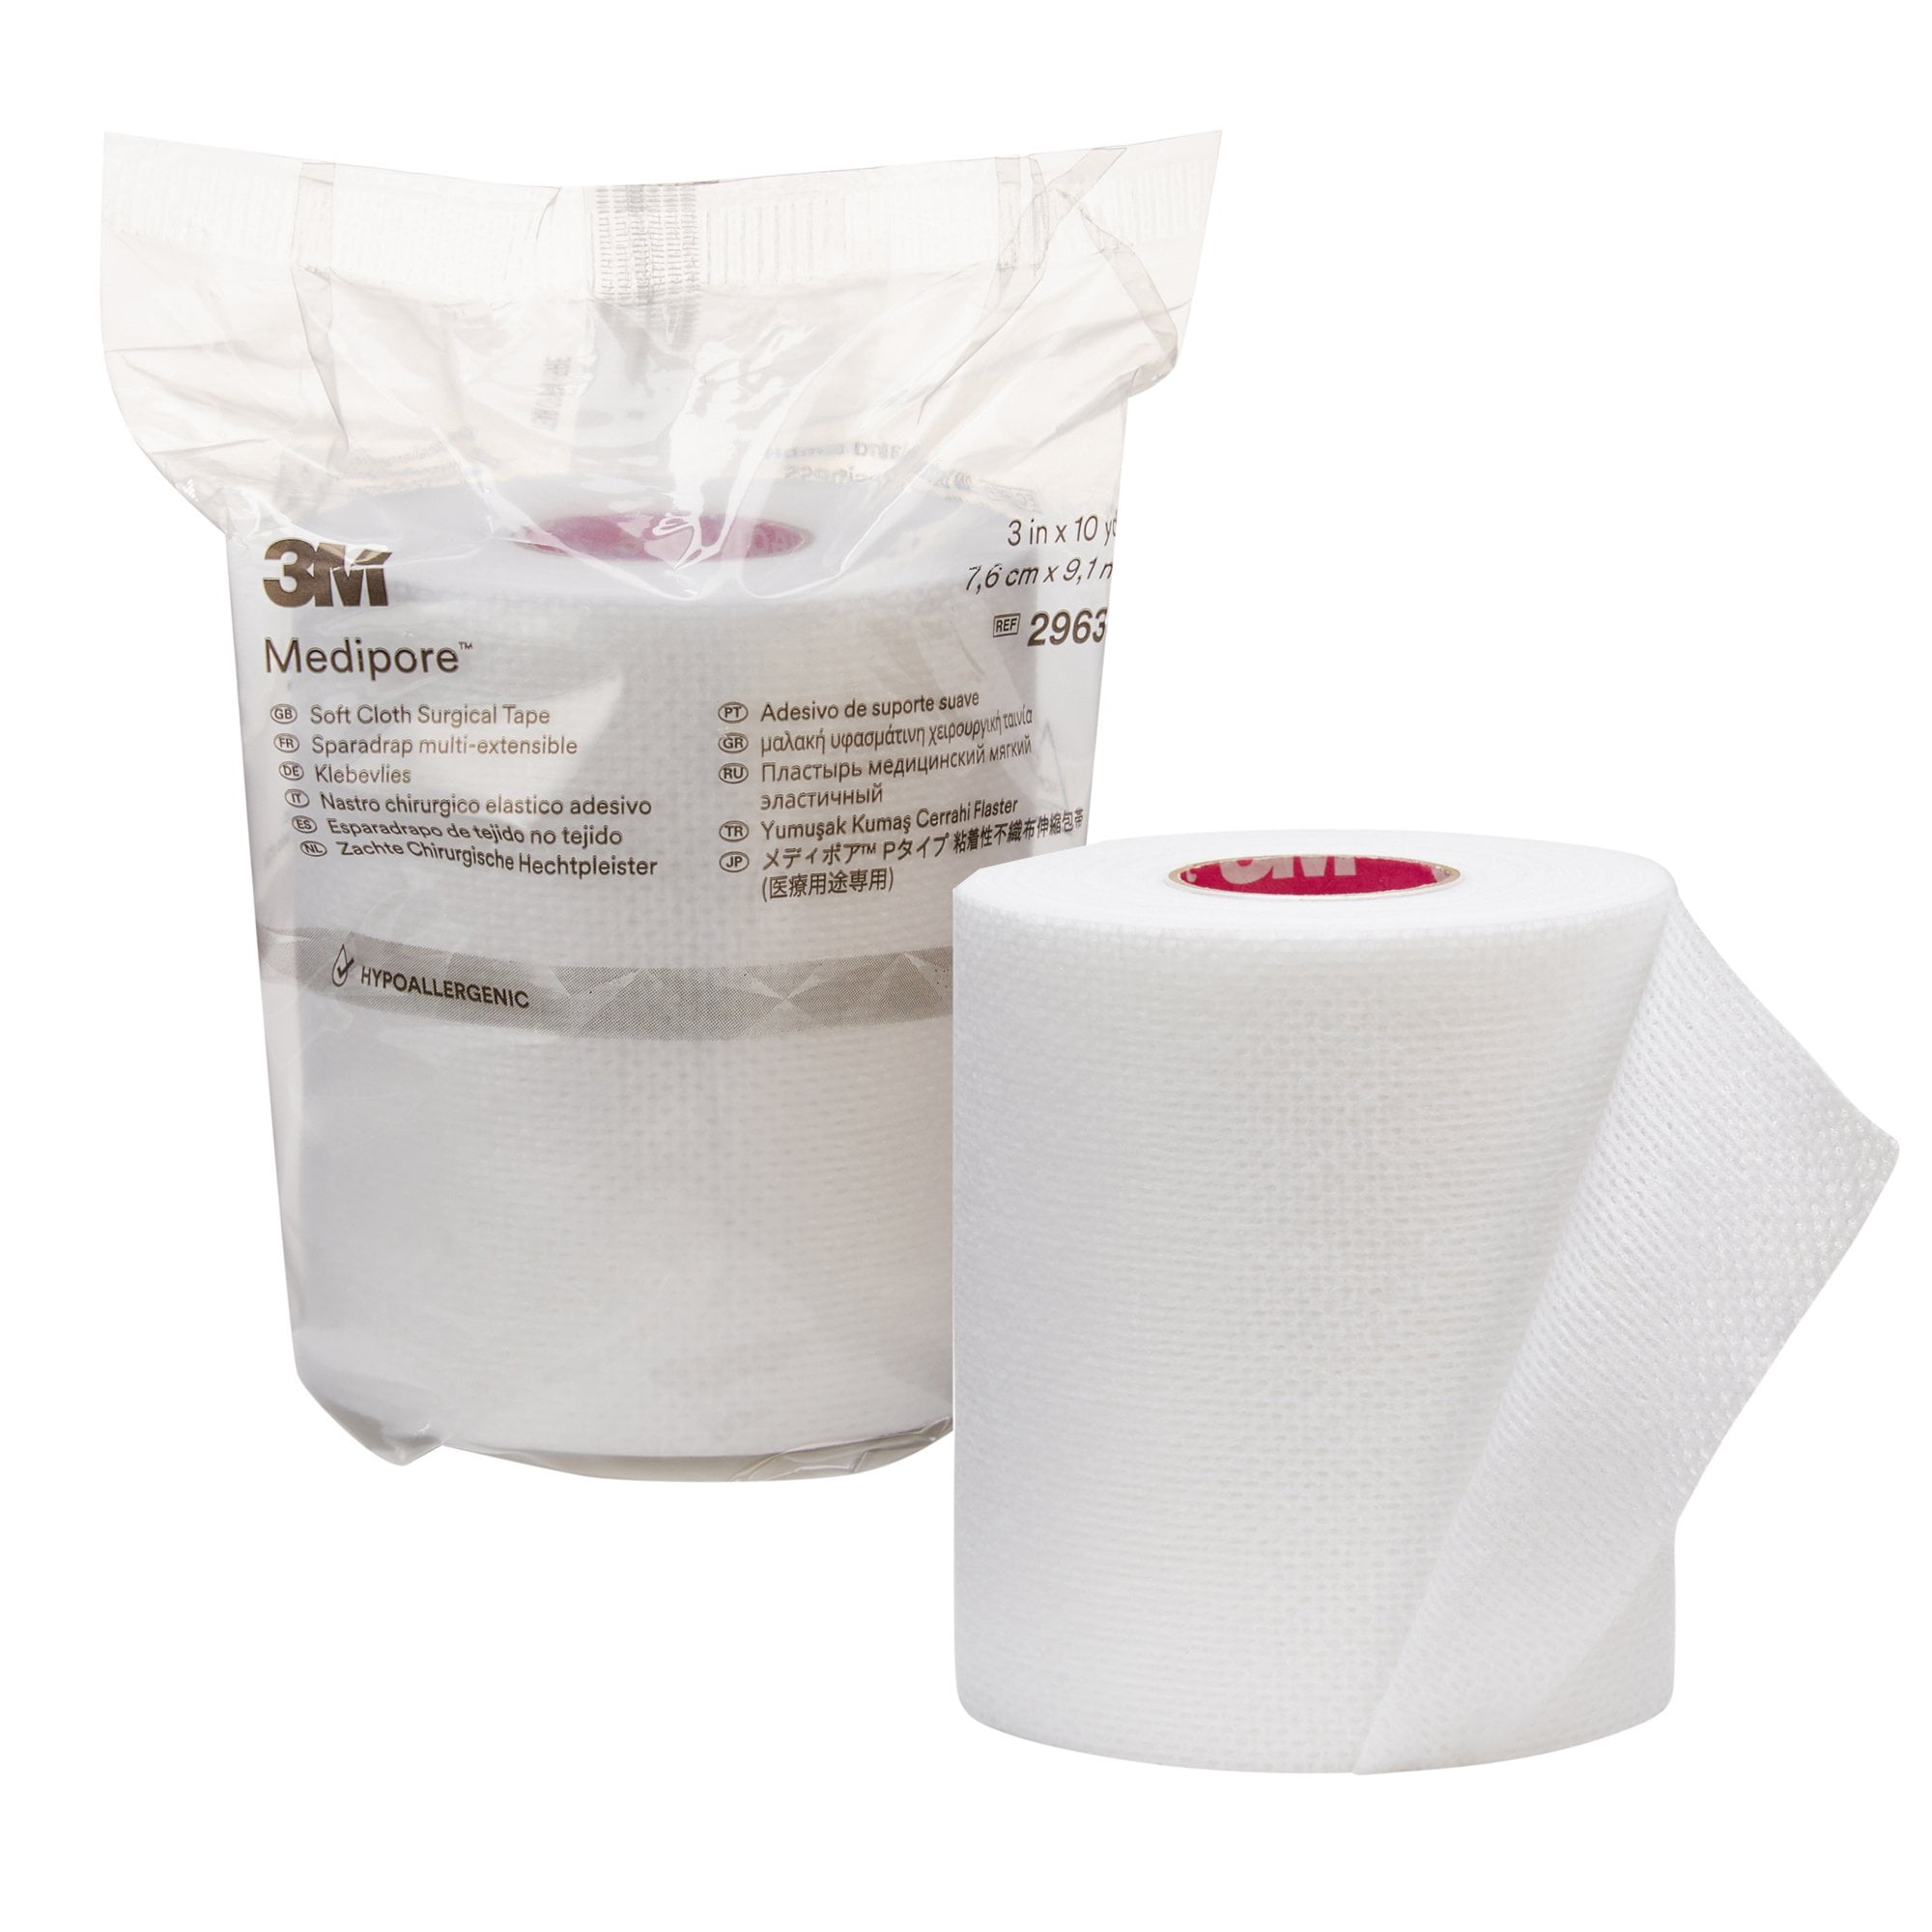 3M 2862 Medipore H Soft Cloth Surgical Tape - Clearance